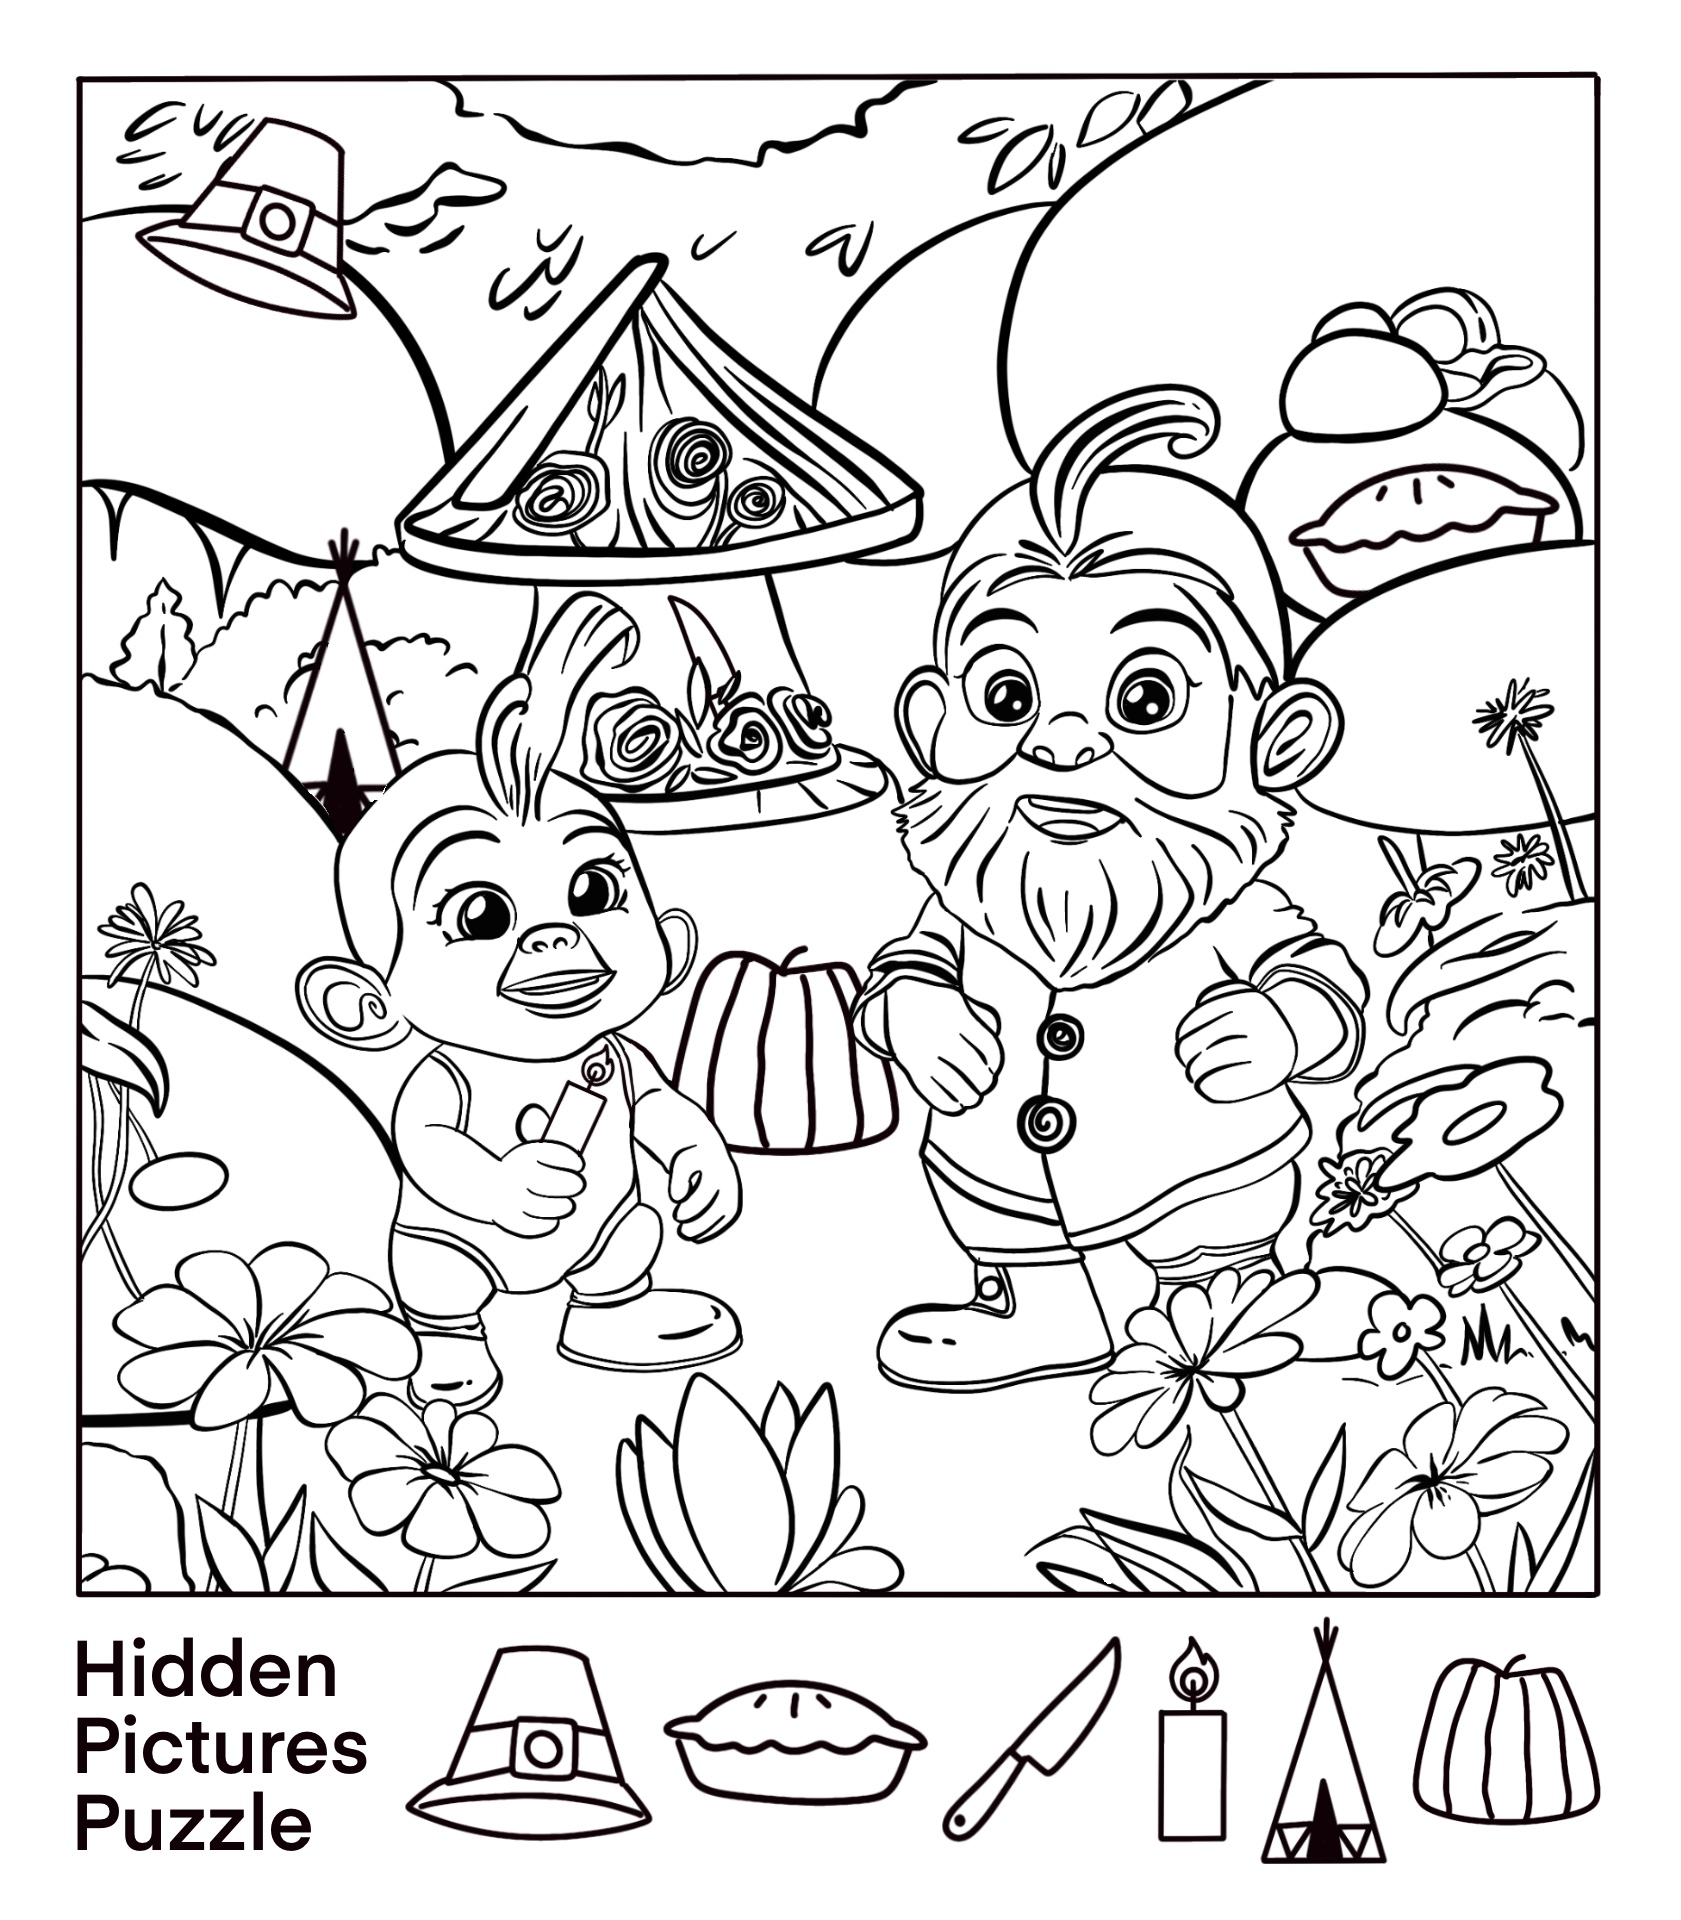 nerdy-free-printable-hidden-pictures-for-adults-pdf-puzzles-for-kids